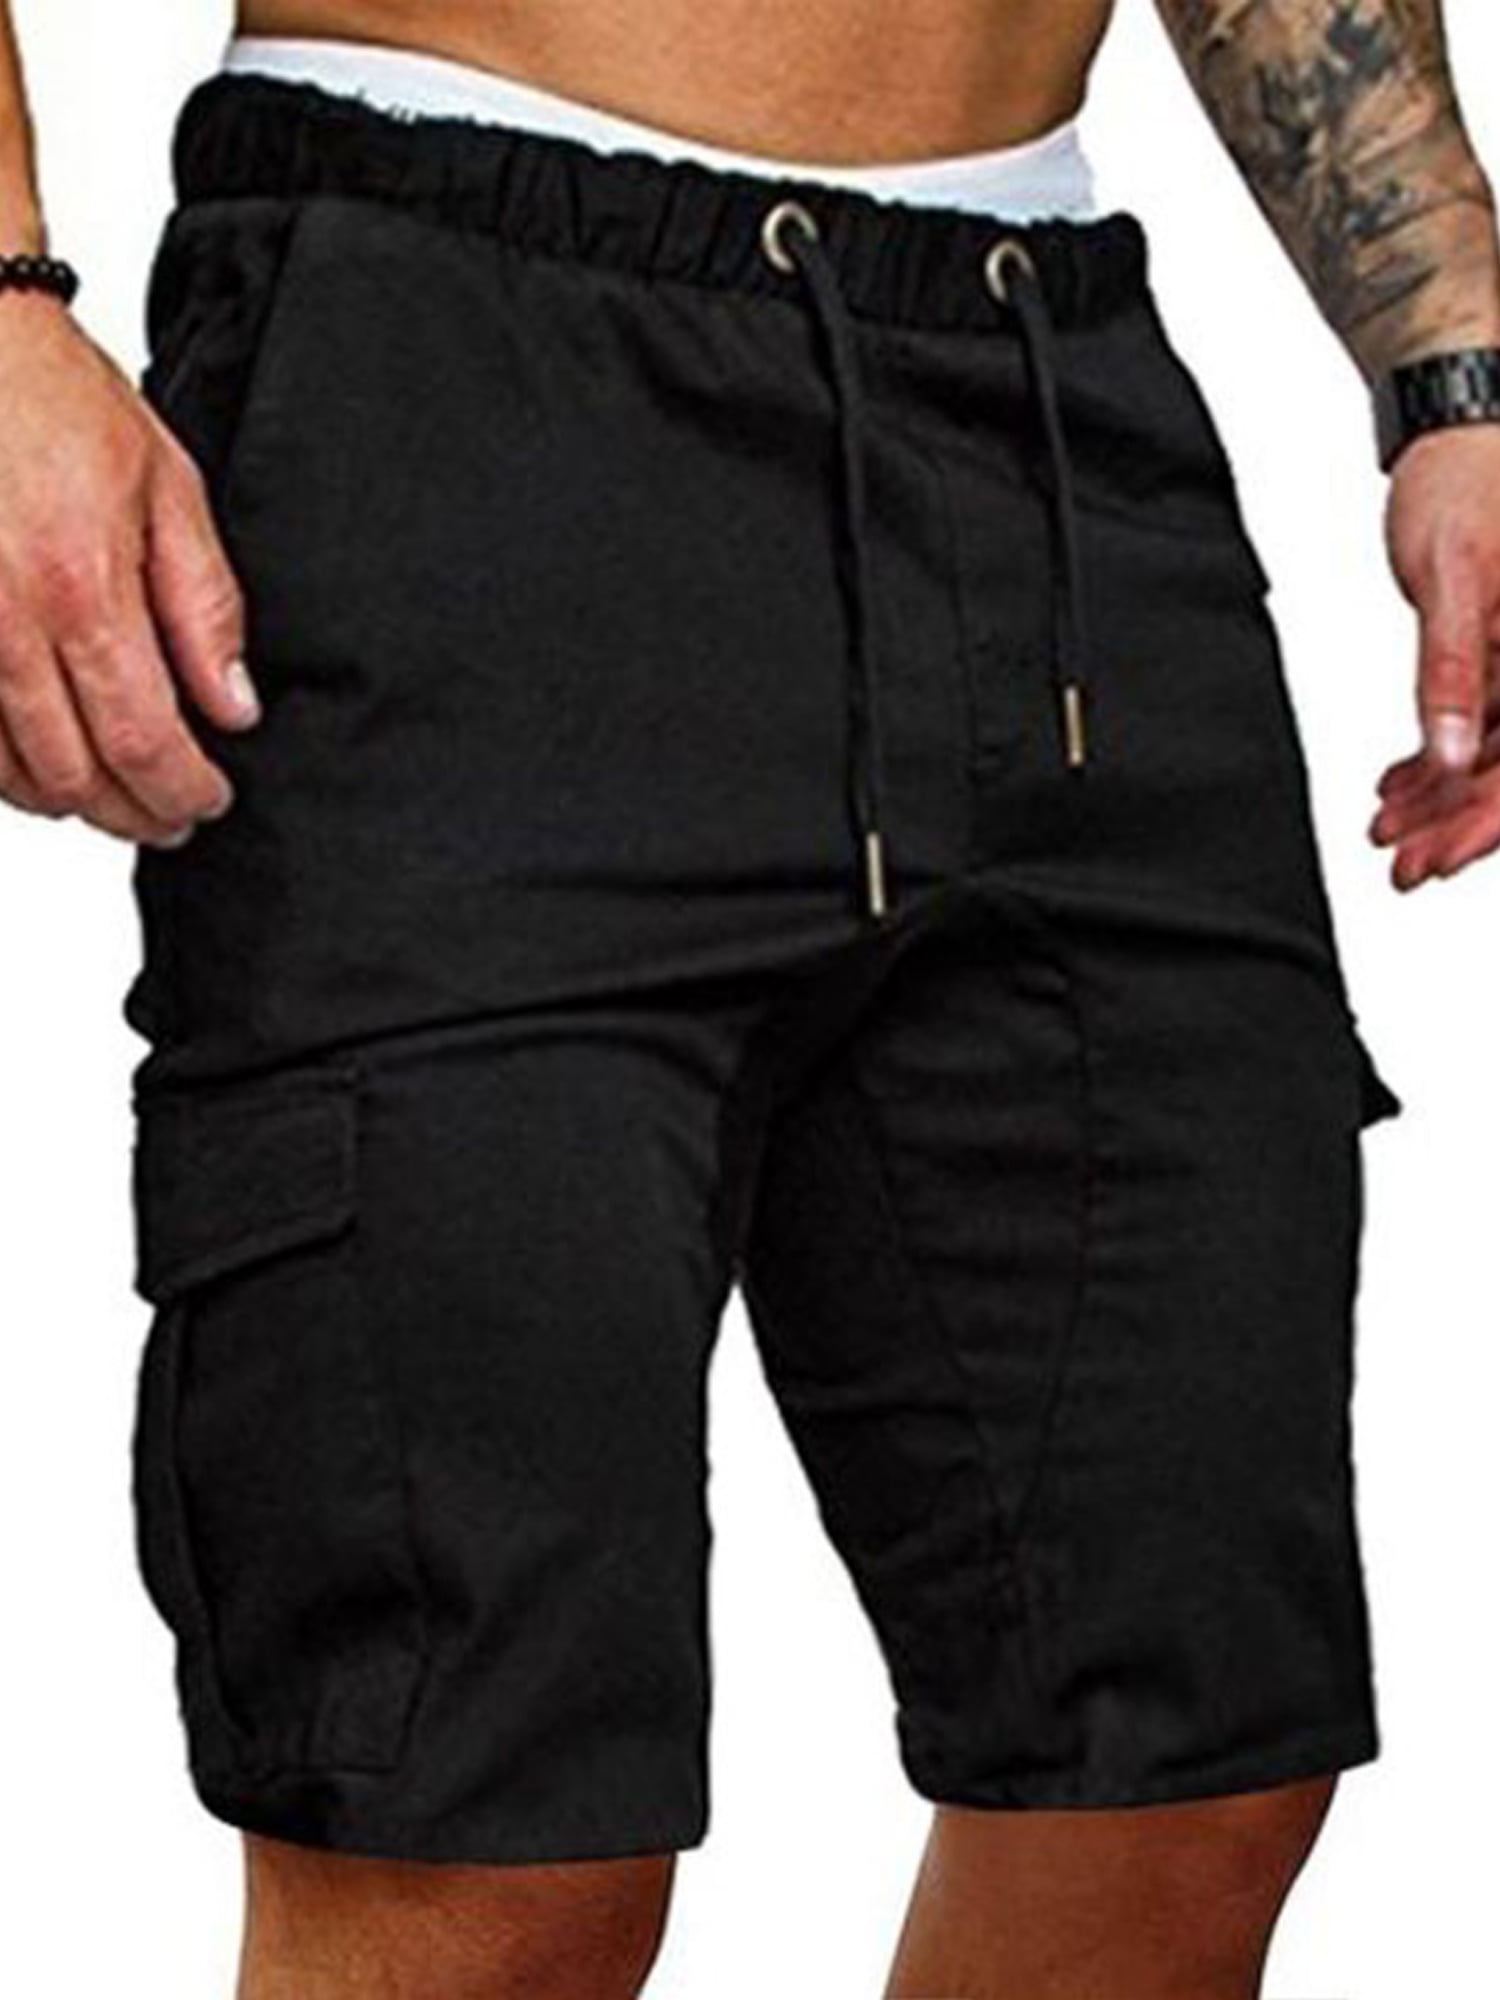 Mens Sport Daily Cargo Short Pants Summer Casual Army Combat Shorts Trousers